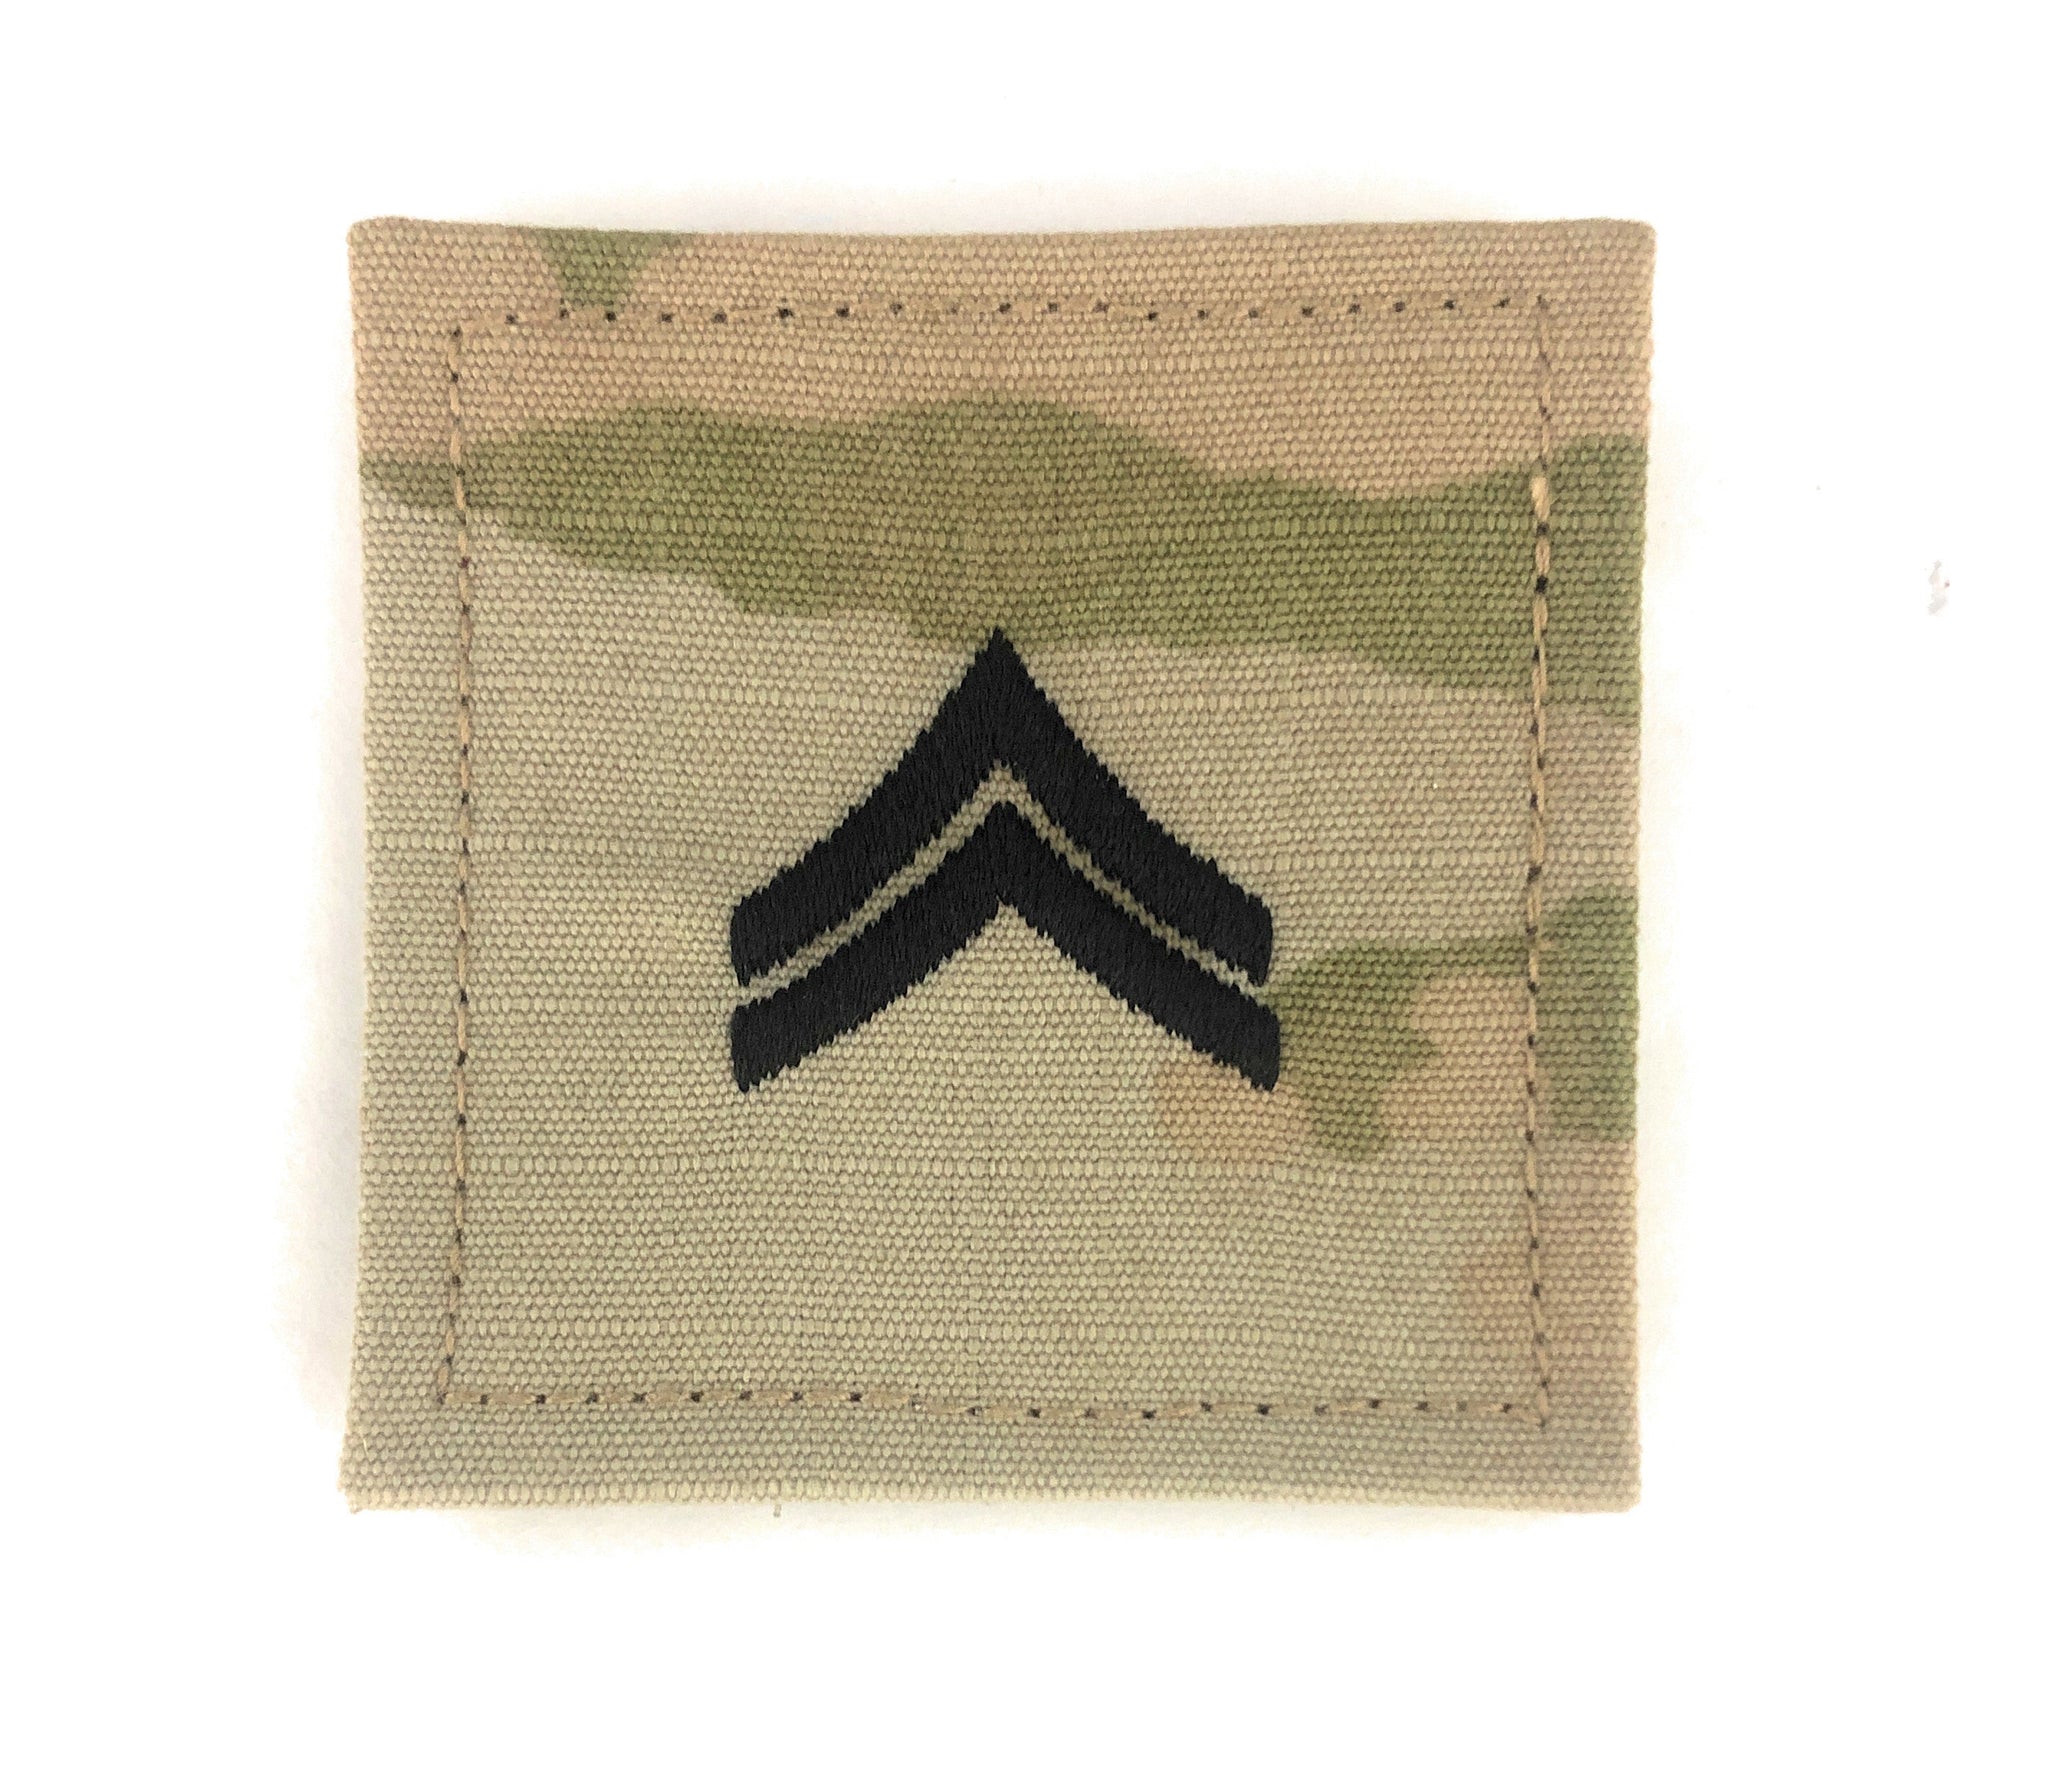 E4 Corporal OCP with Hook Fastener - Insignia Depot